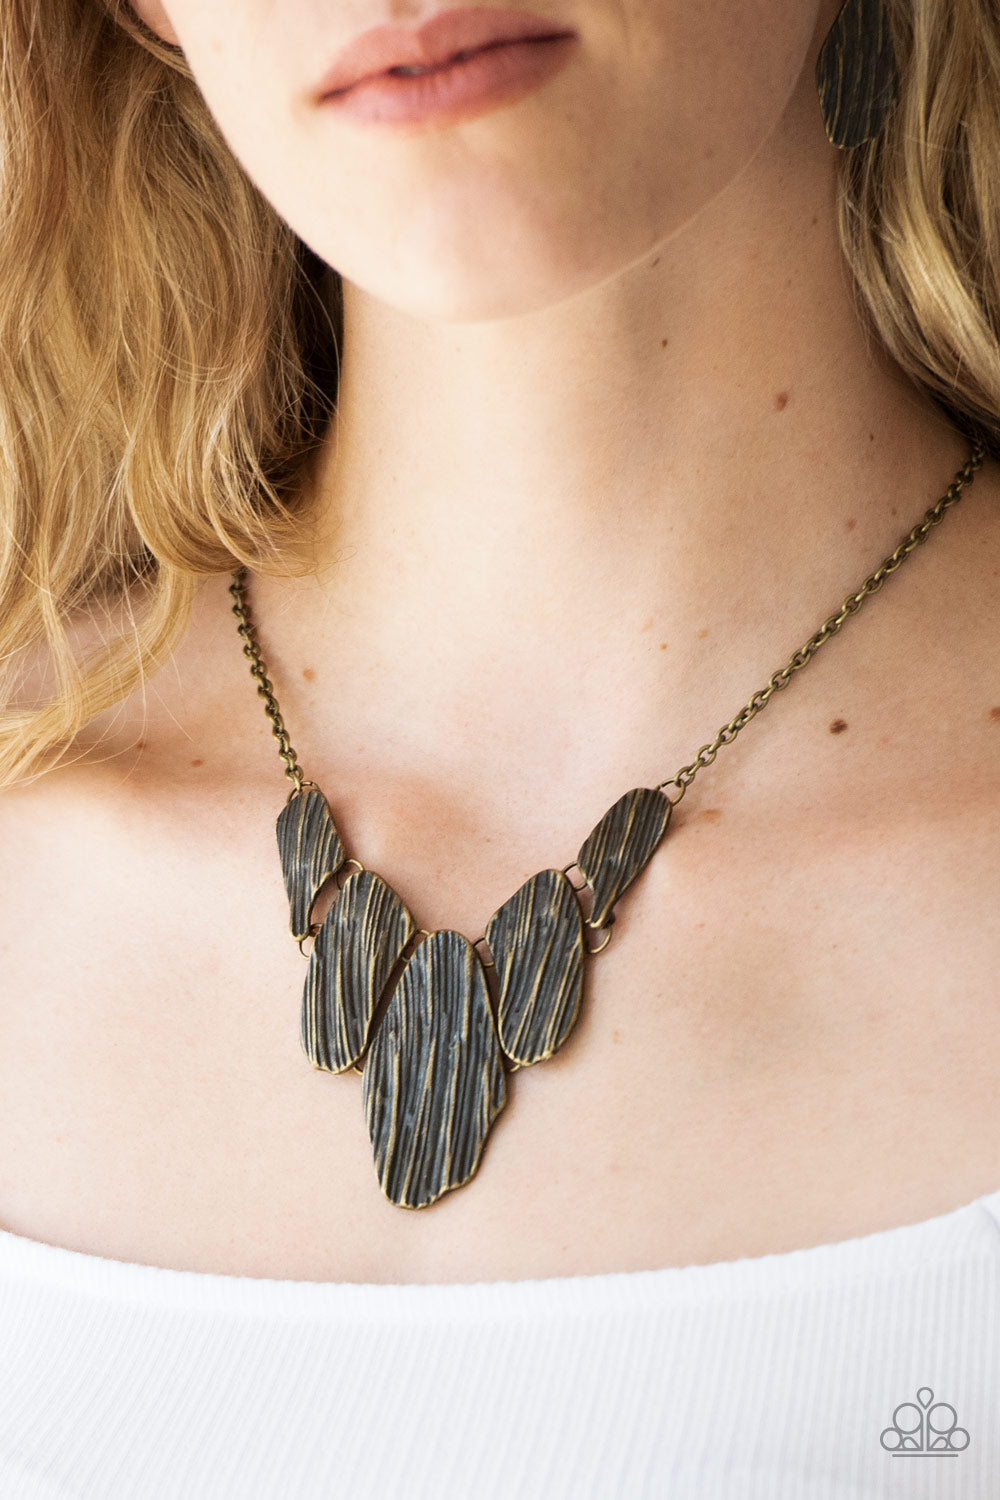 Paparazzi Necklace ~ A New DISCovery - Brass